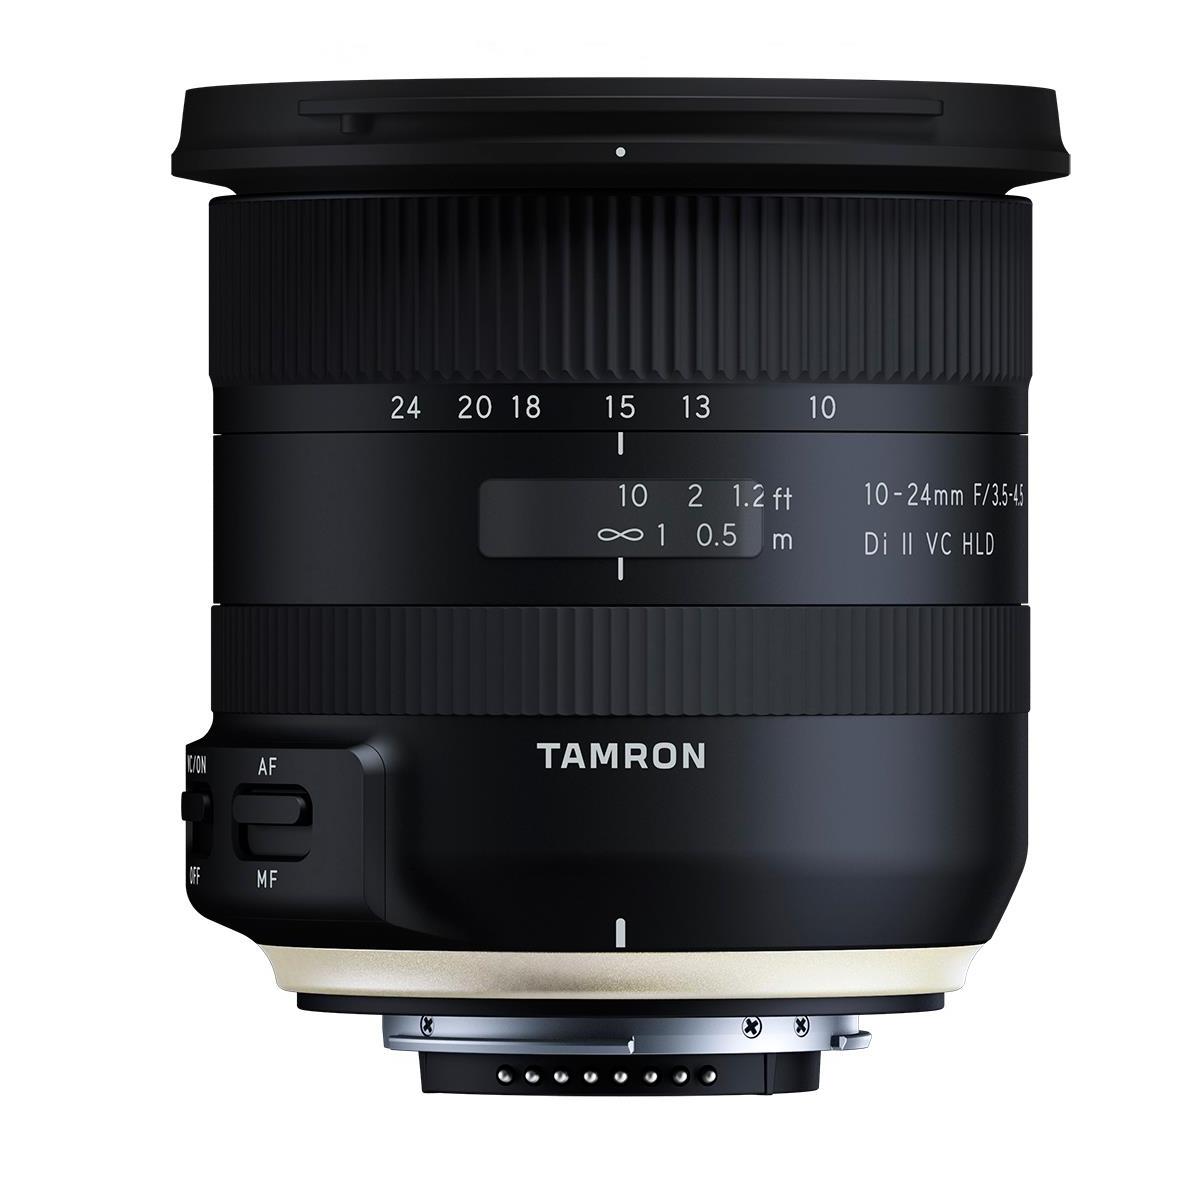 Image of Tamron 10-24mm f/3.5-4.5 Di II VC HLD Wide Angle Lens for Nikon F Mount